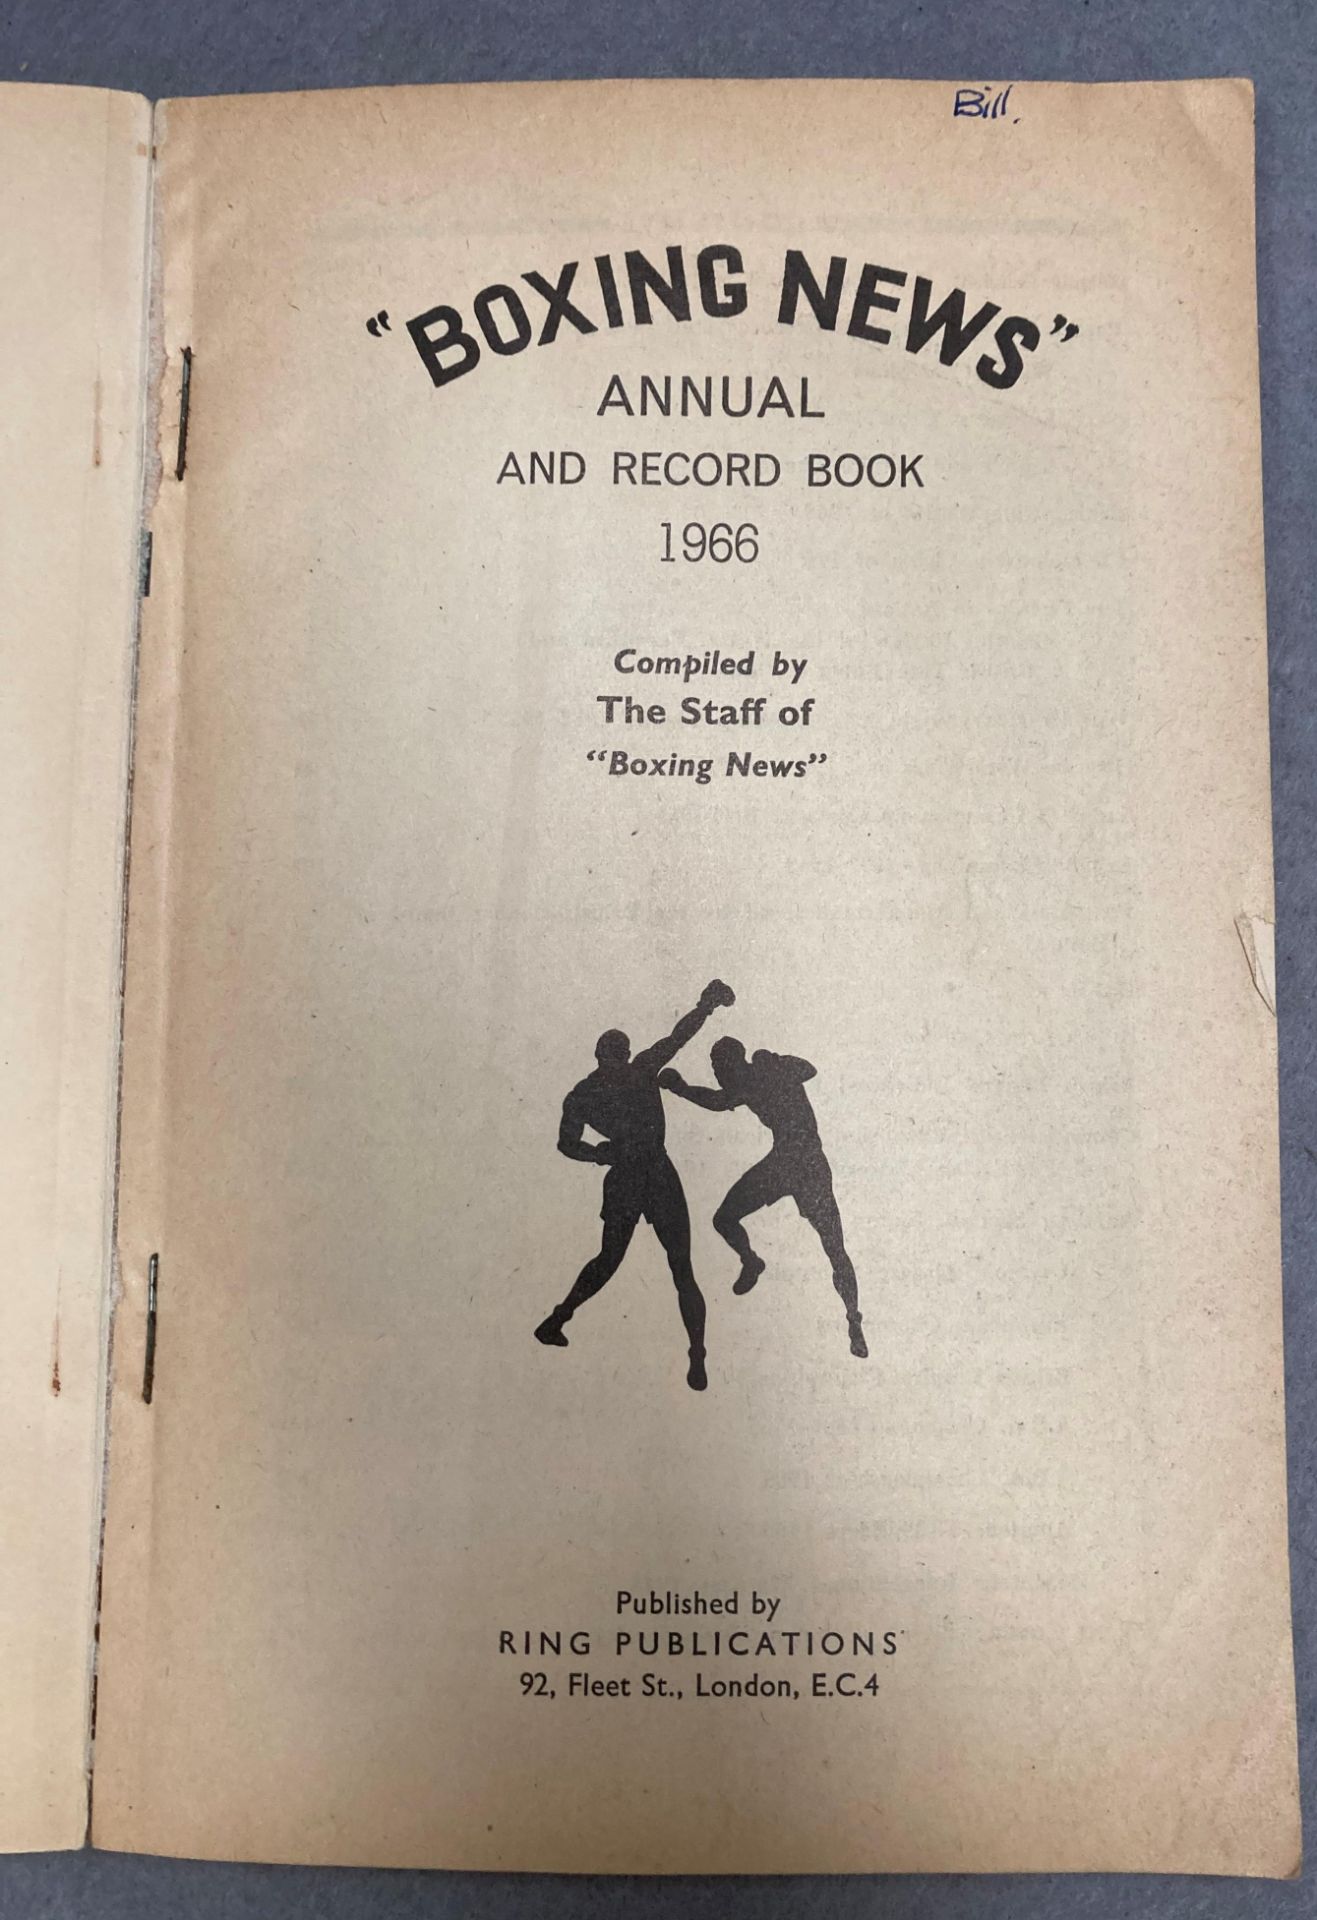 A 1966 Boxing News Annual and Record book with references to Peter Carney and Mick Carney - Image 5 of 5